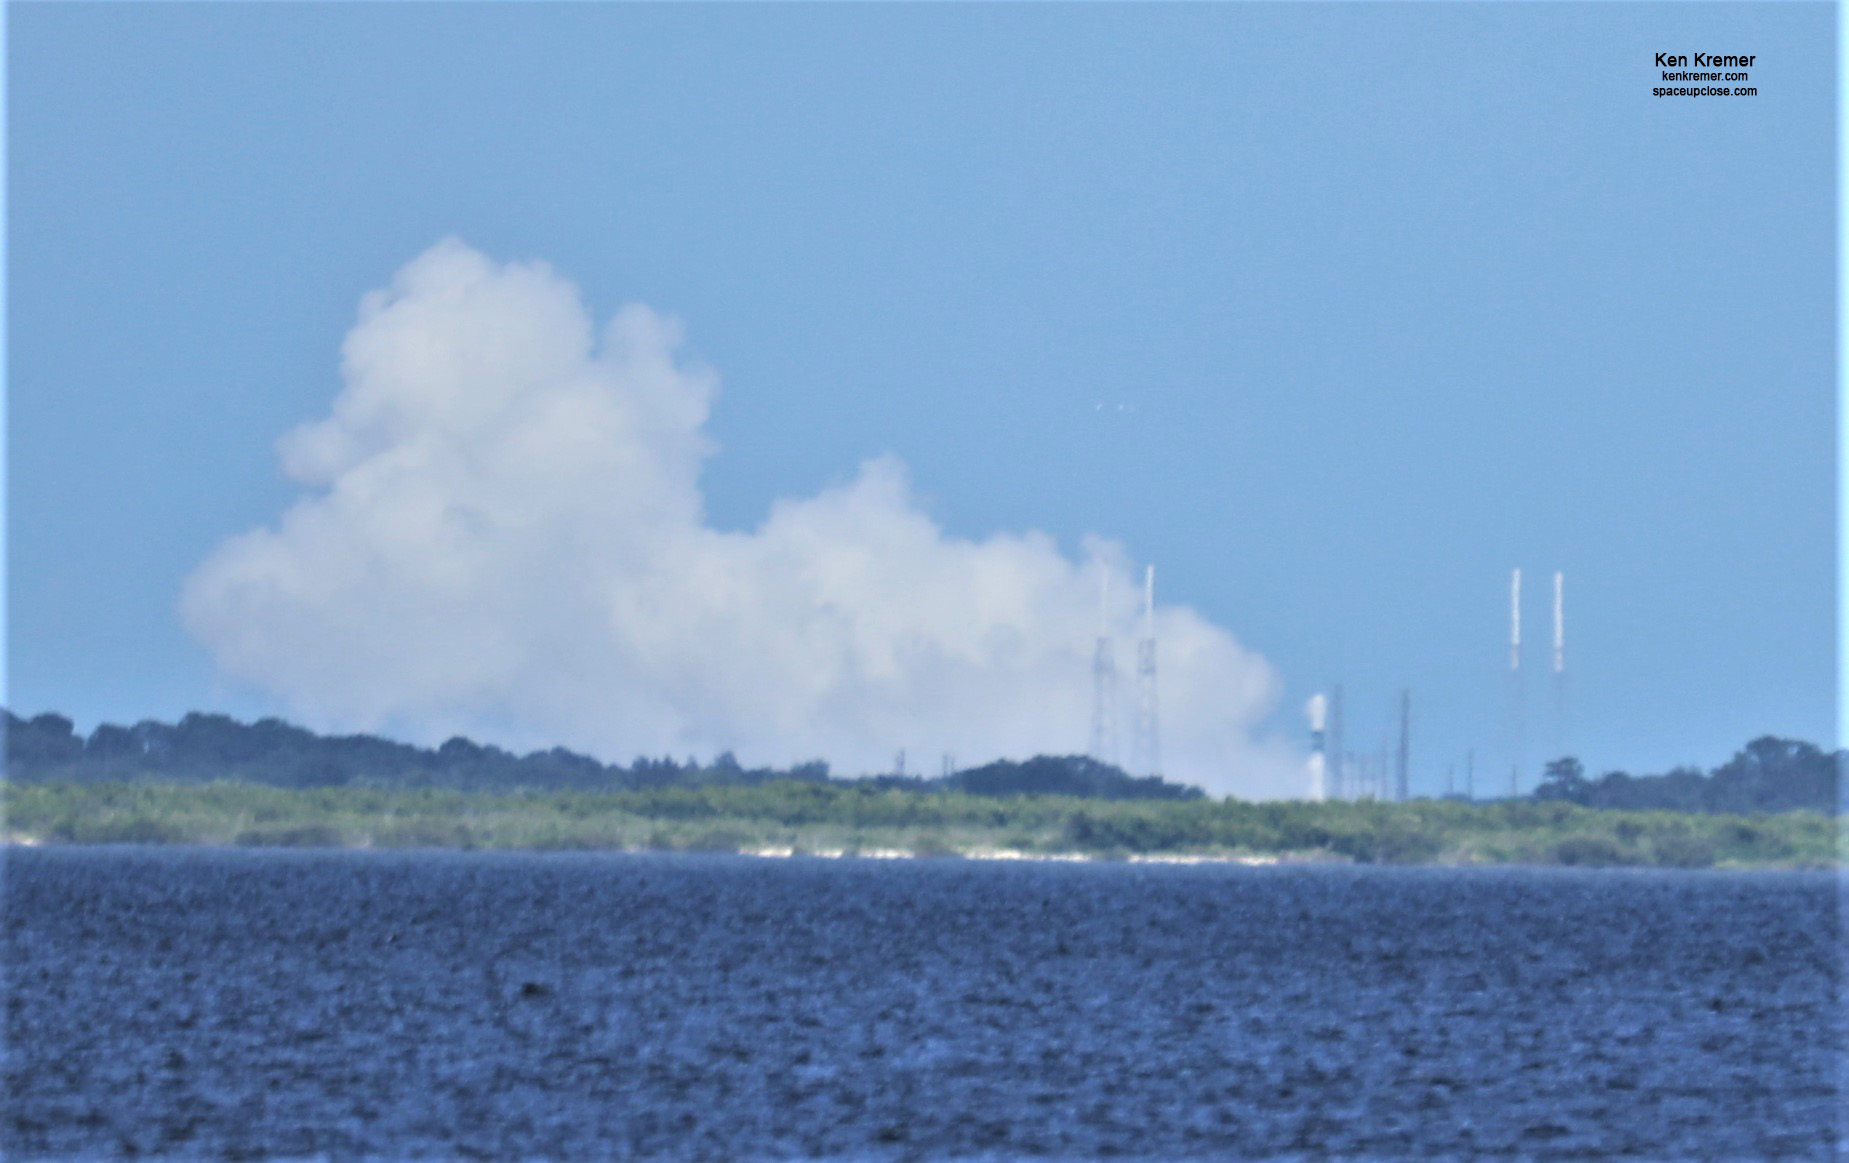 SpaceX Completes Successful Falcon 9 Static Fire Test Then Postpones Transporter-2 Rideshare Liftoff